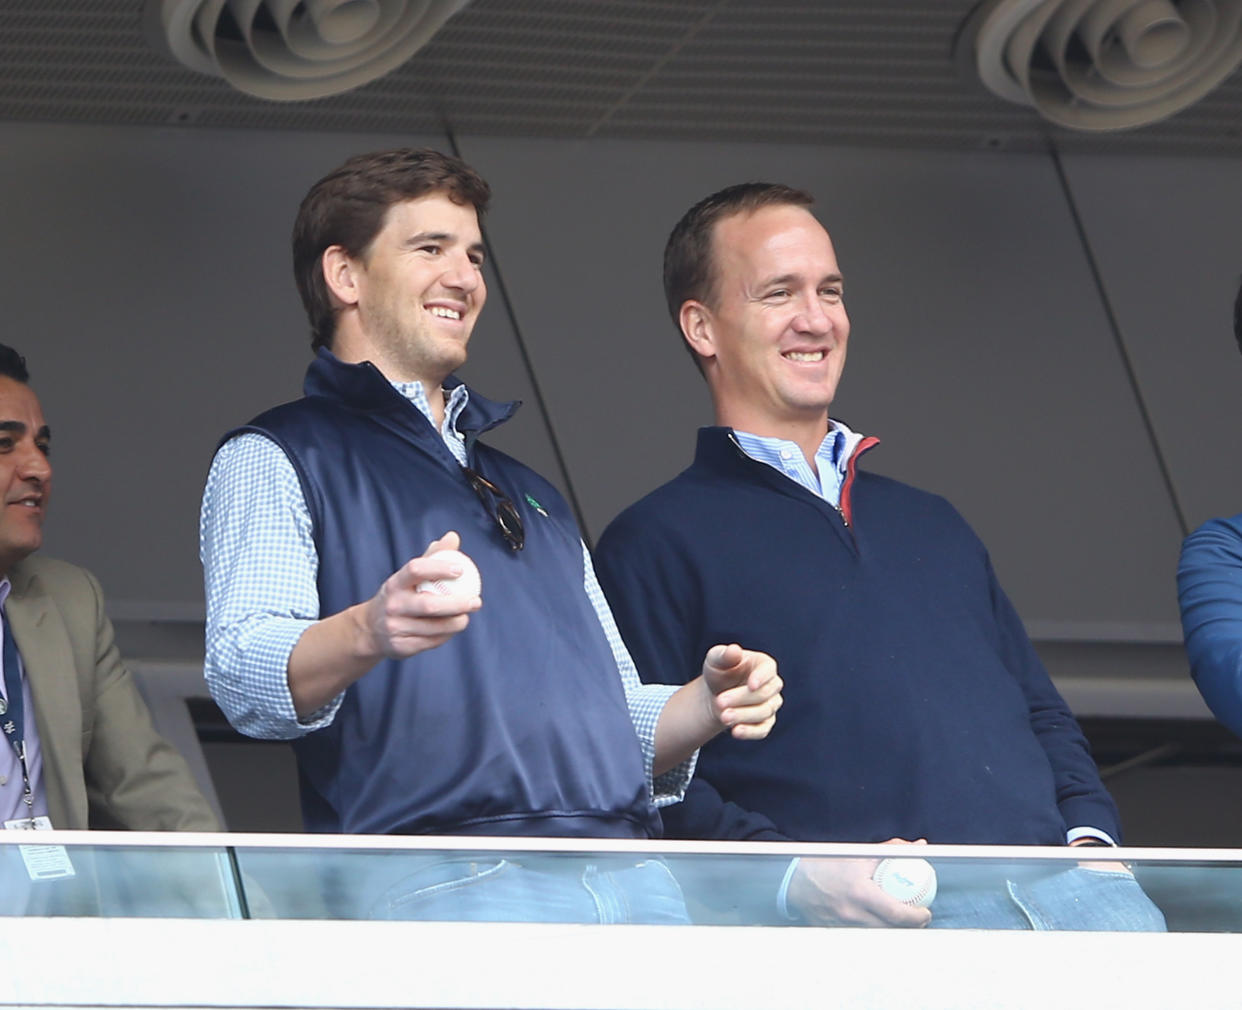 NEW YORK, NY - MAY 04:  Eli Manning of the New York Giants and Peyton Manning of the Denver Broncos appear at the game between the New York Yankees and the Tampa Bay Rays  on May 4, 2014 in the Bronx borough of New York City.  (Photo by Al Bello/Getty Images)